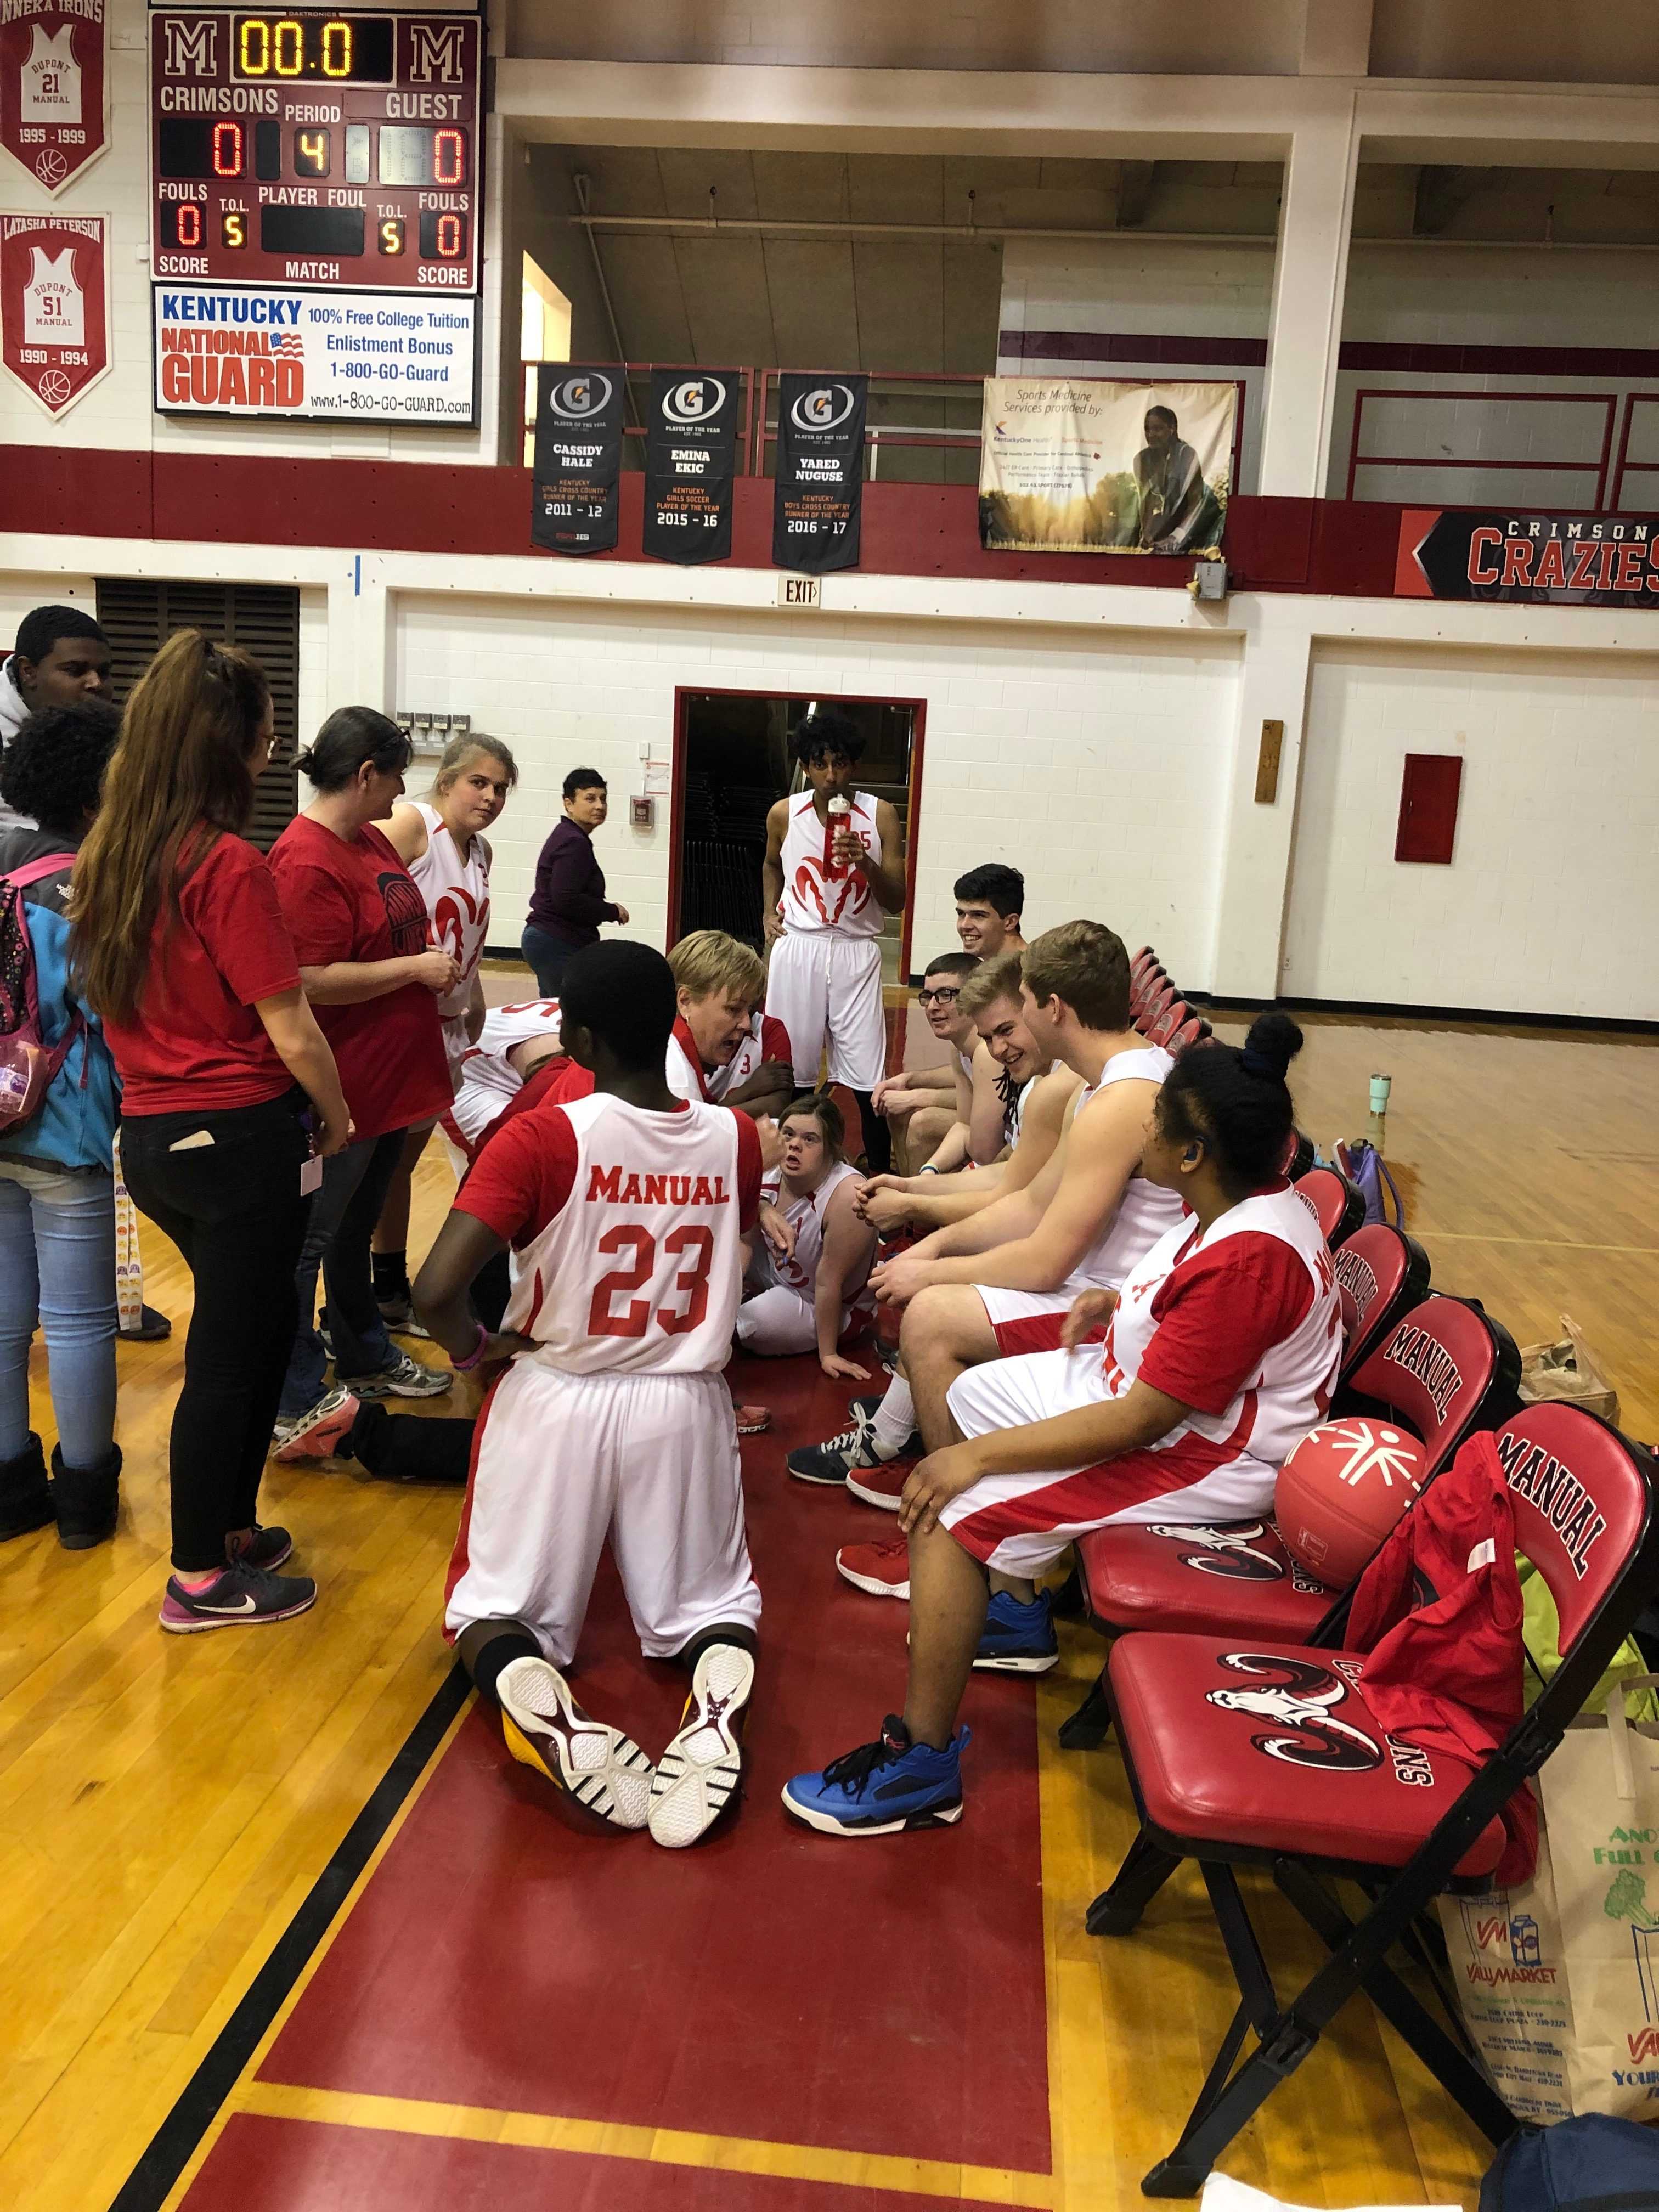 Manual Unified Basketball Team meets together after their game with eastern